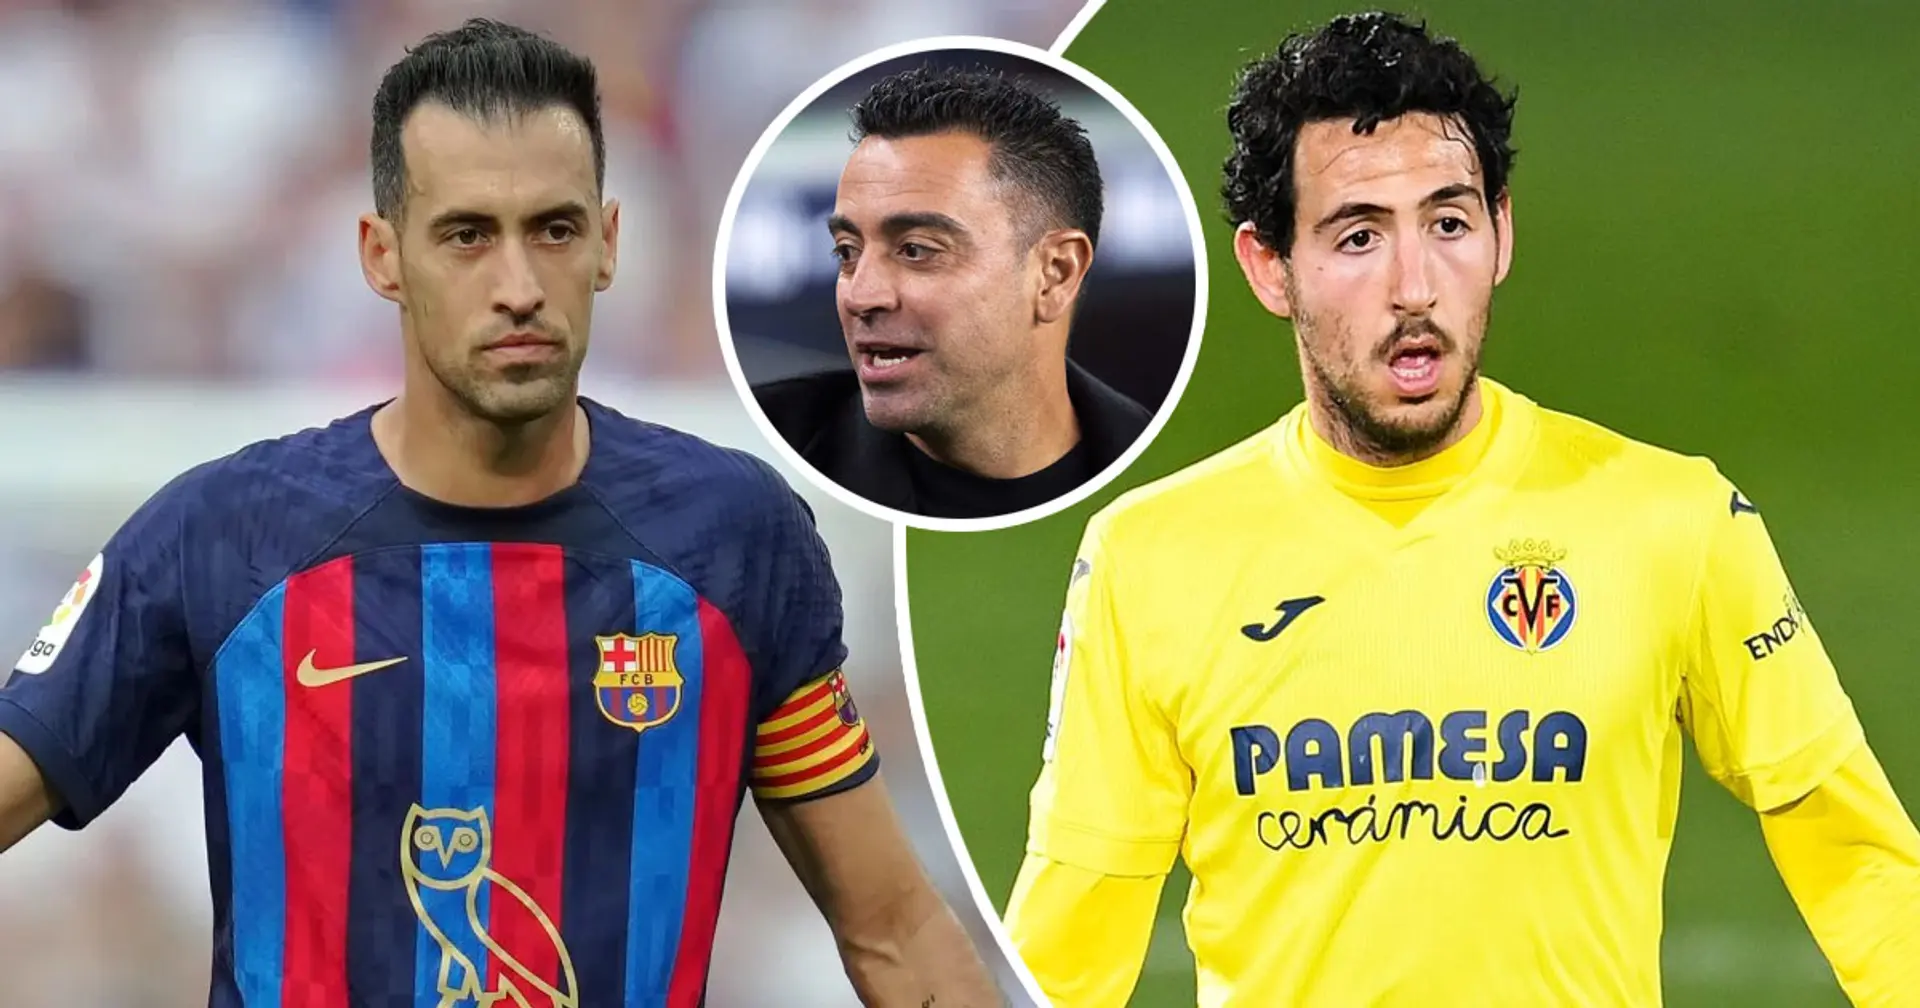 Xavi wants 33-year-old Parejo to replace Busquets next summer - top source